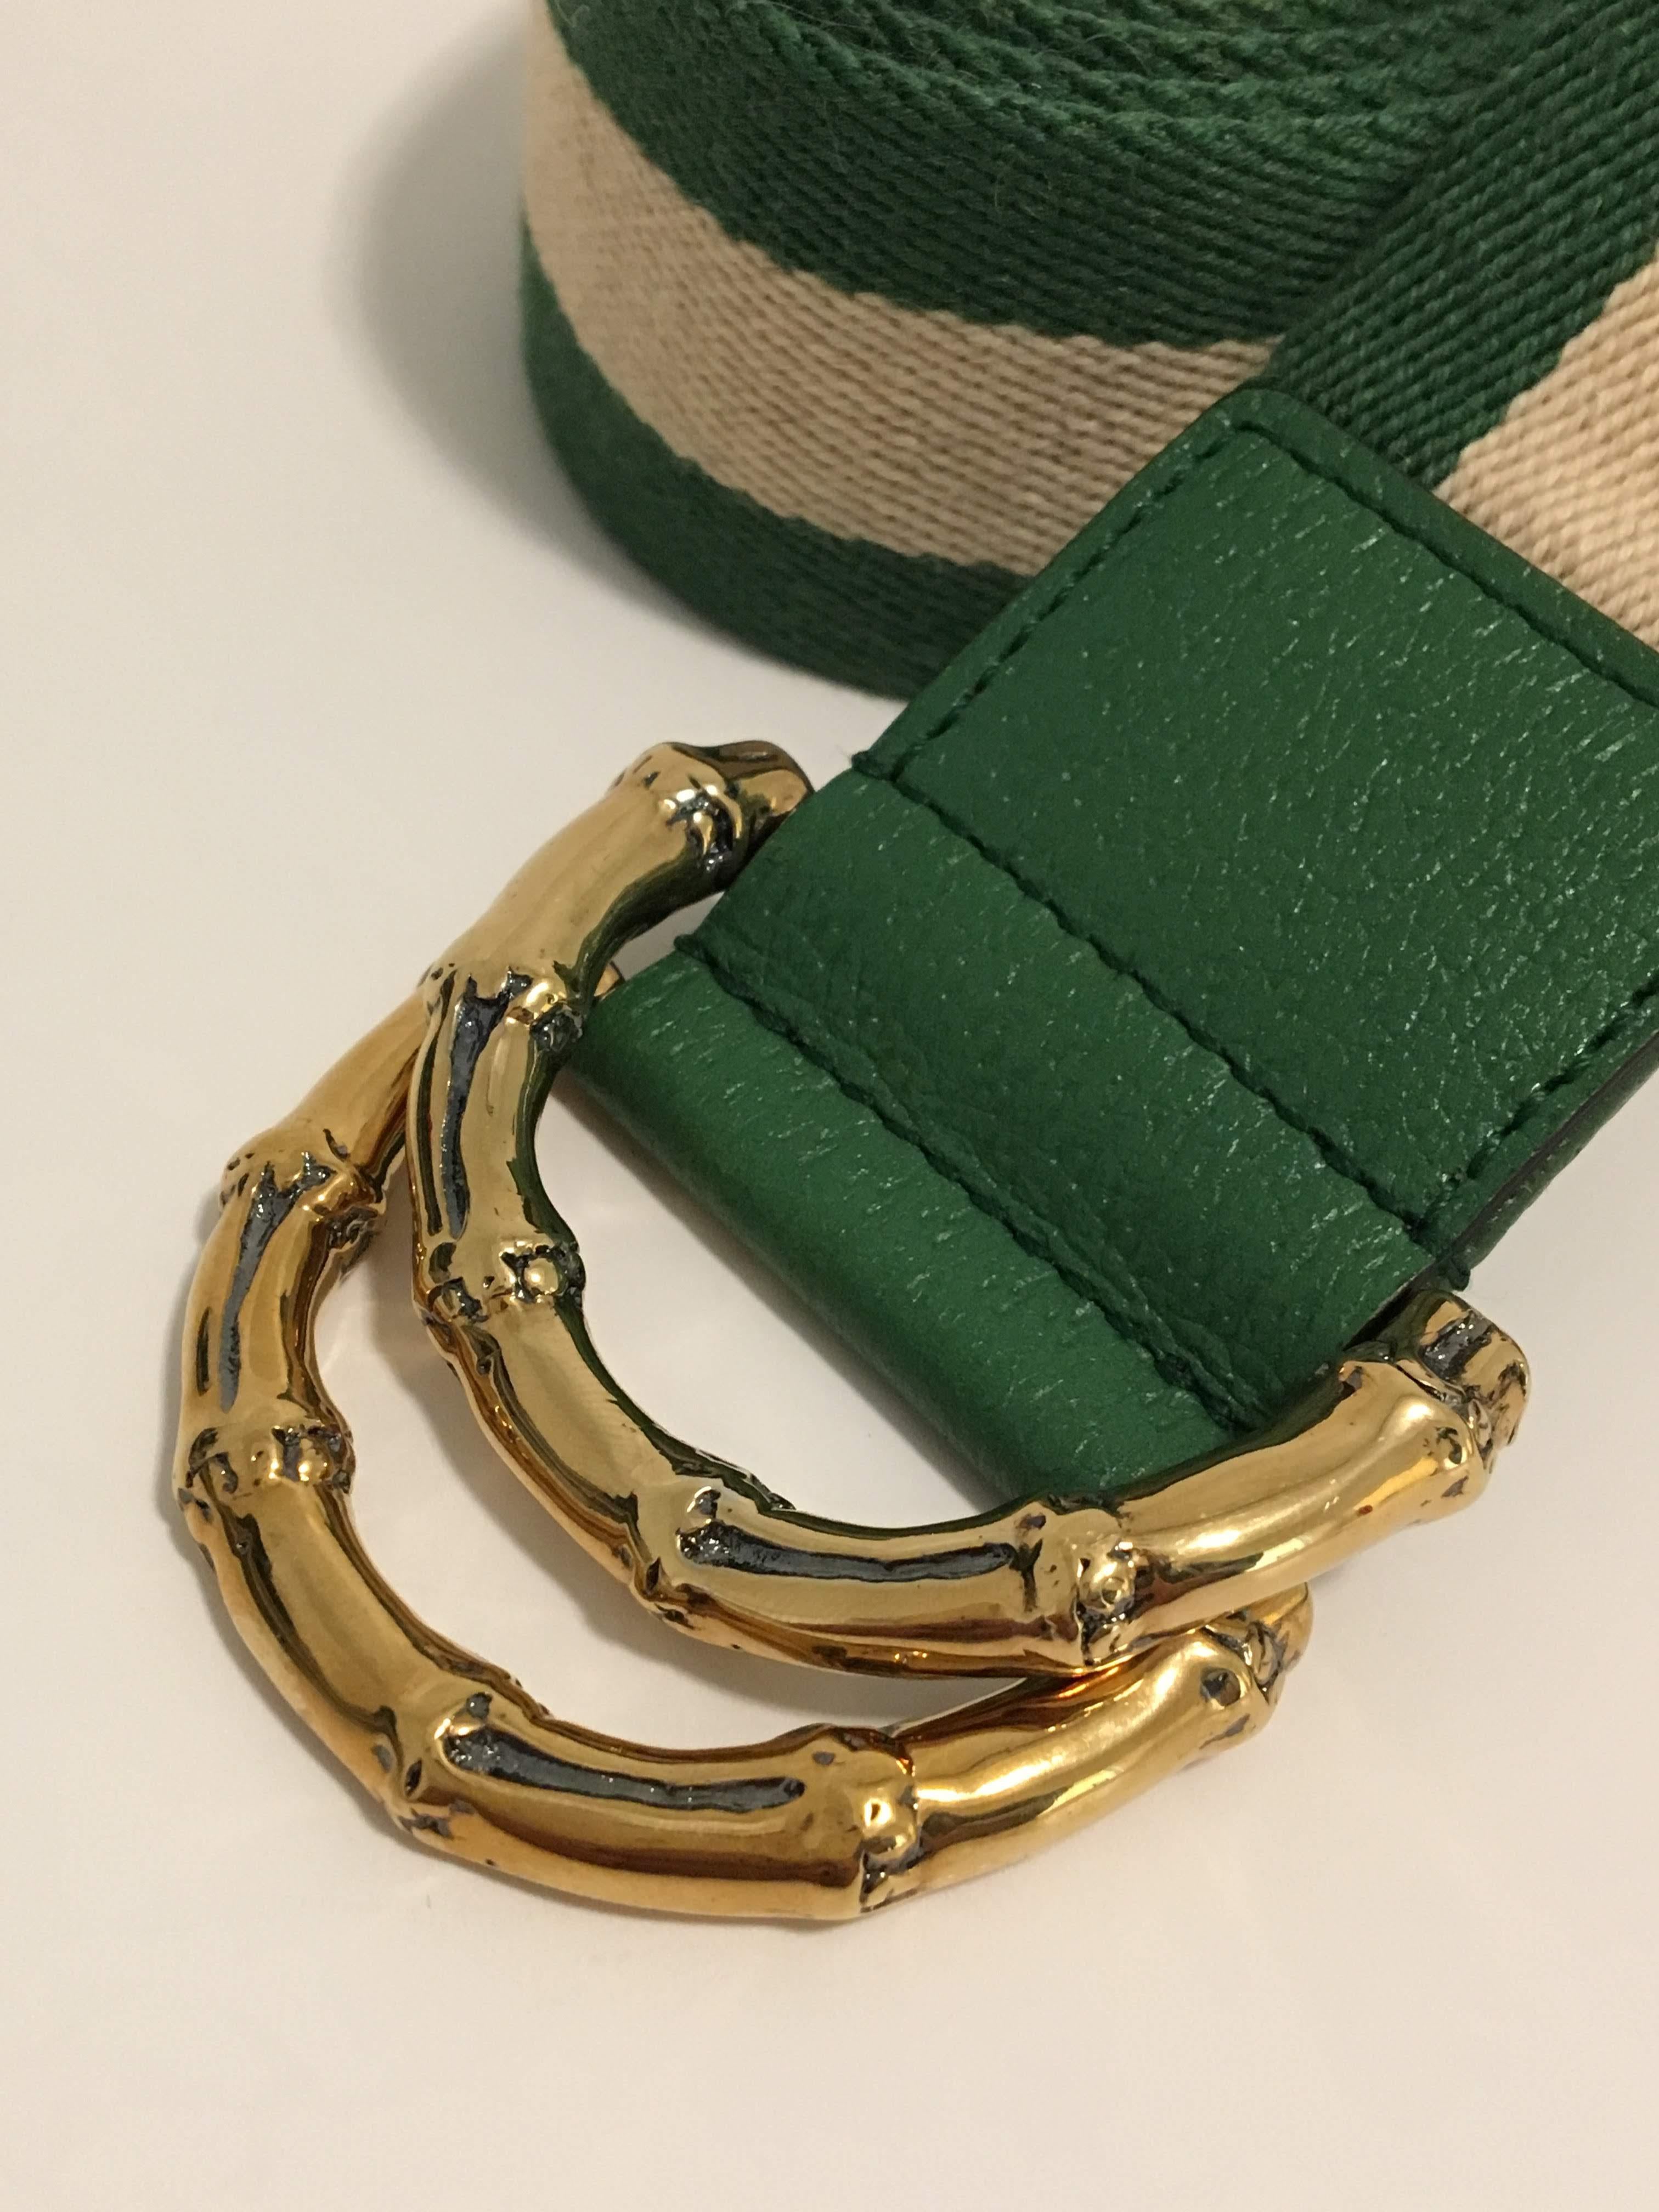 Gucci Two-Tone Belt in Green and Beige with Bamboo-Style Gold Buckle